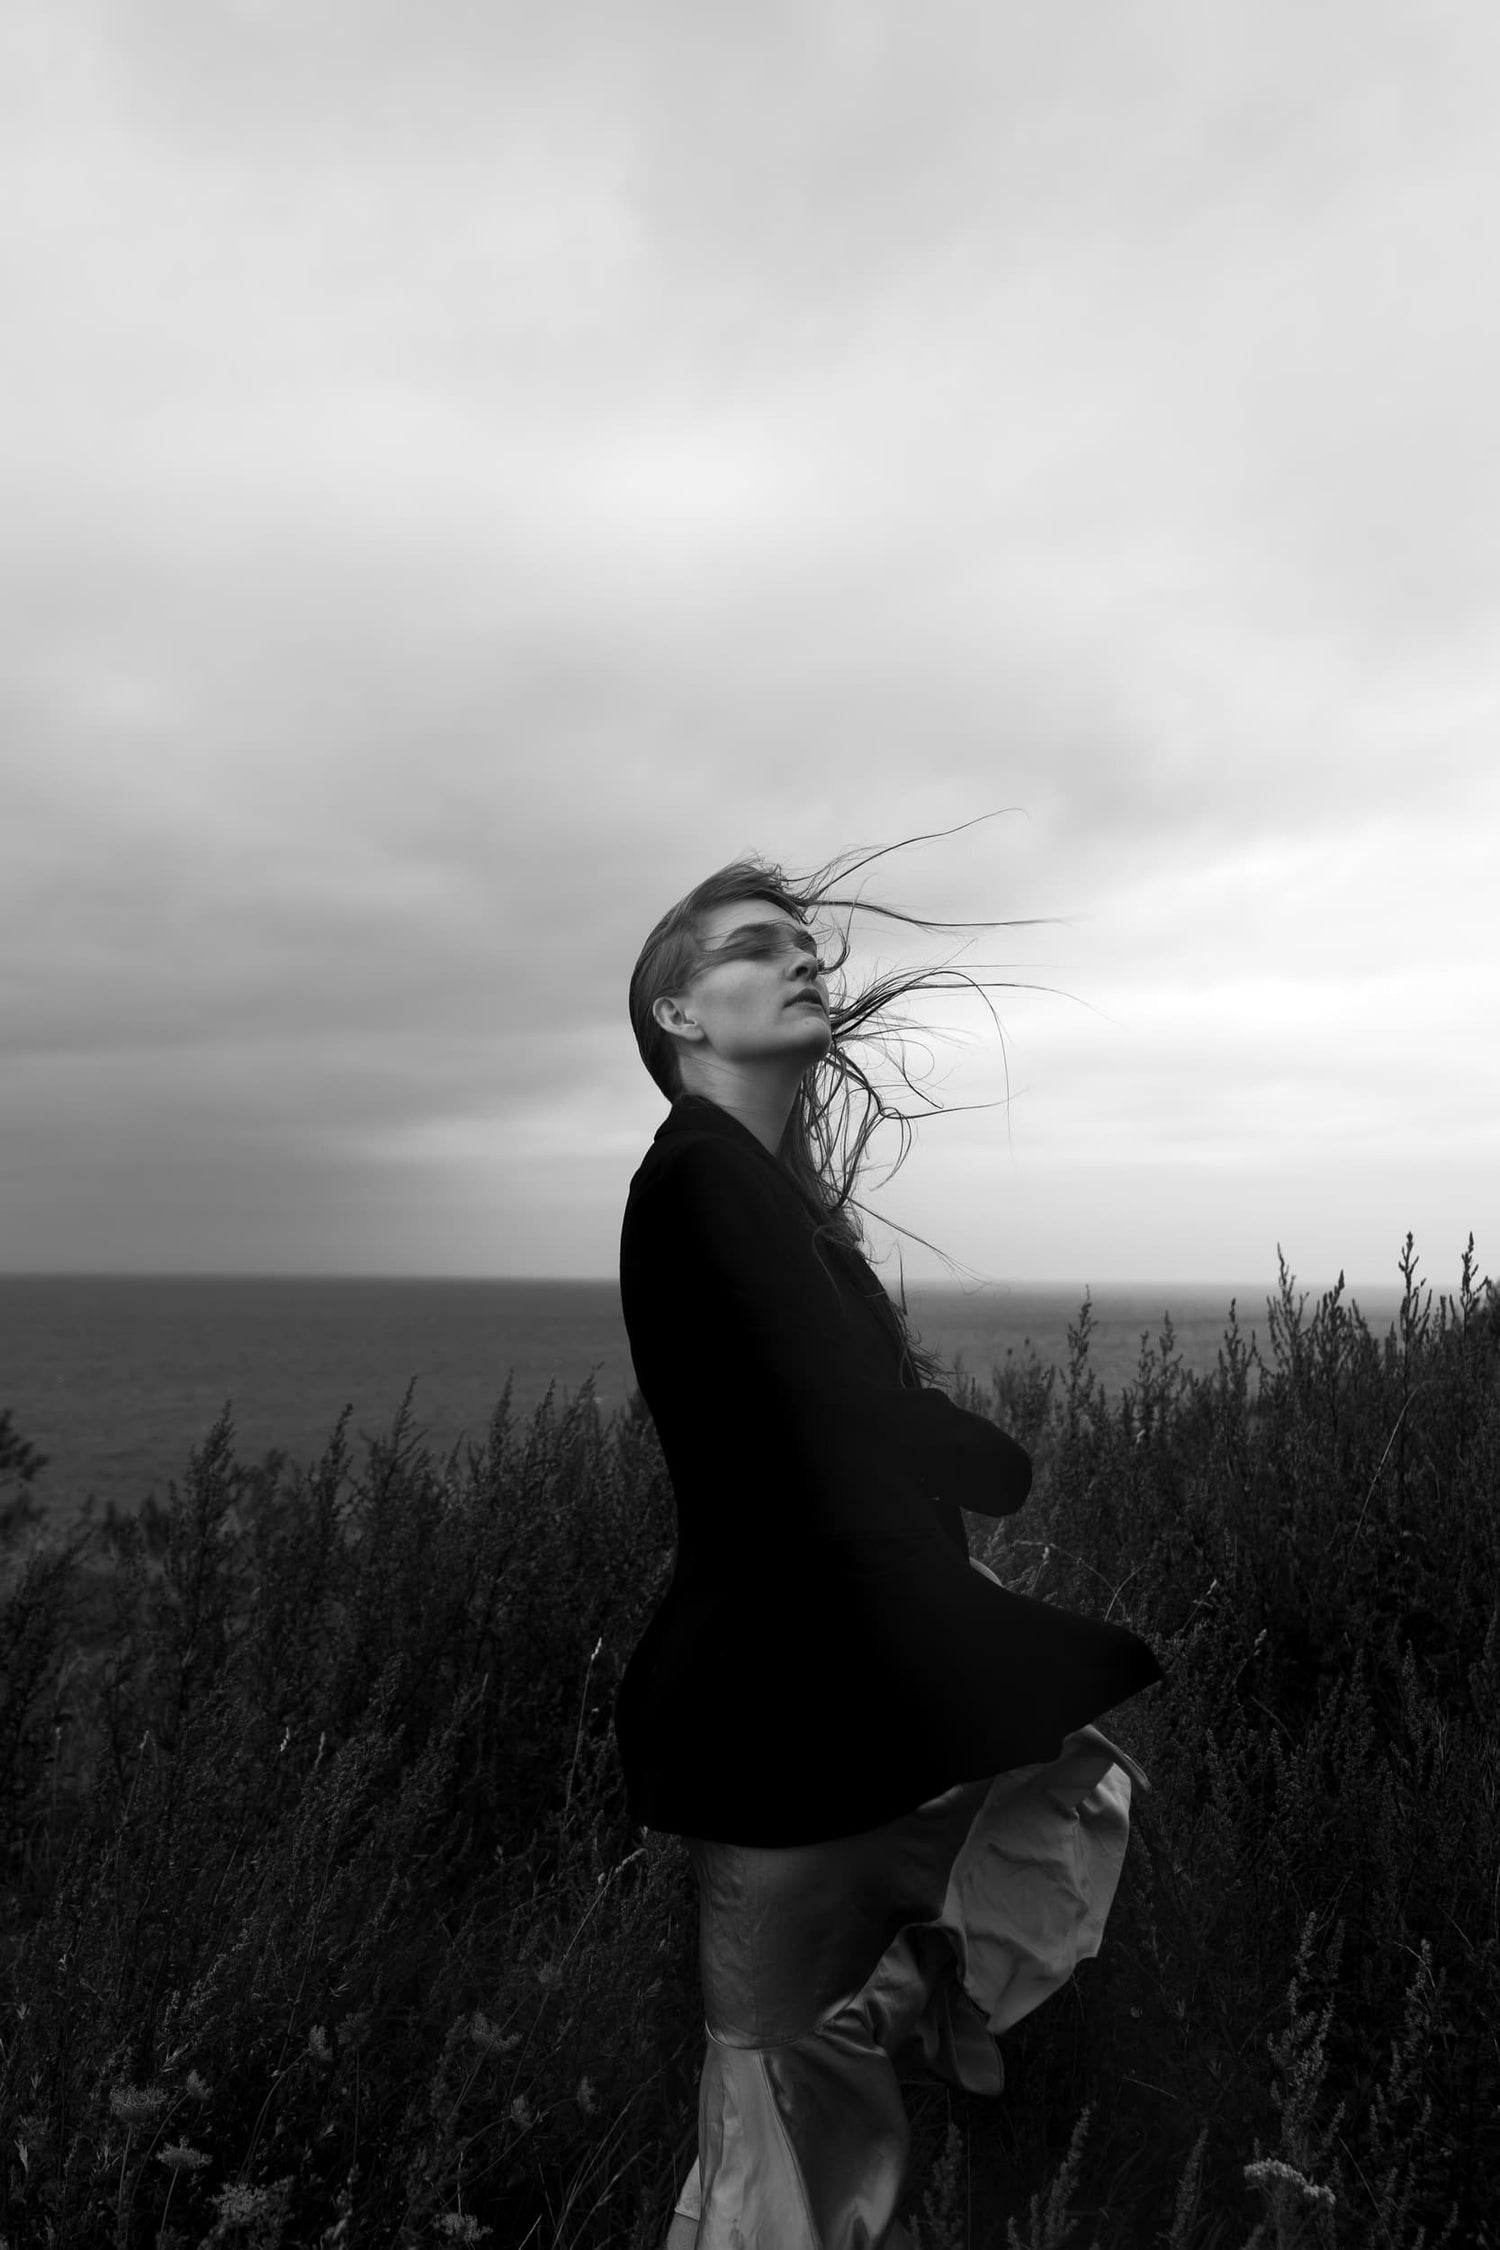 Person standing in the wind, embodying chaos and dreams, in a black and white photograph by Celin May from "The Unknown" collection.
